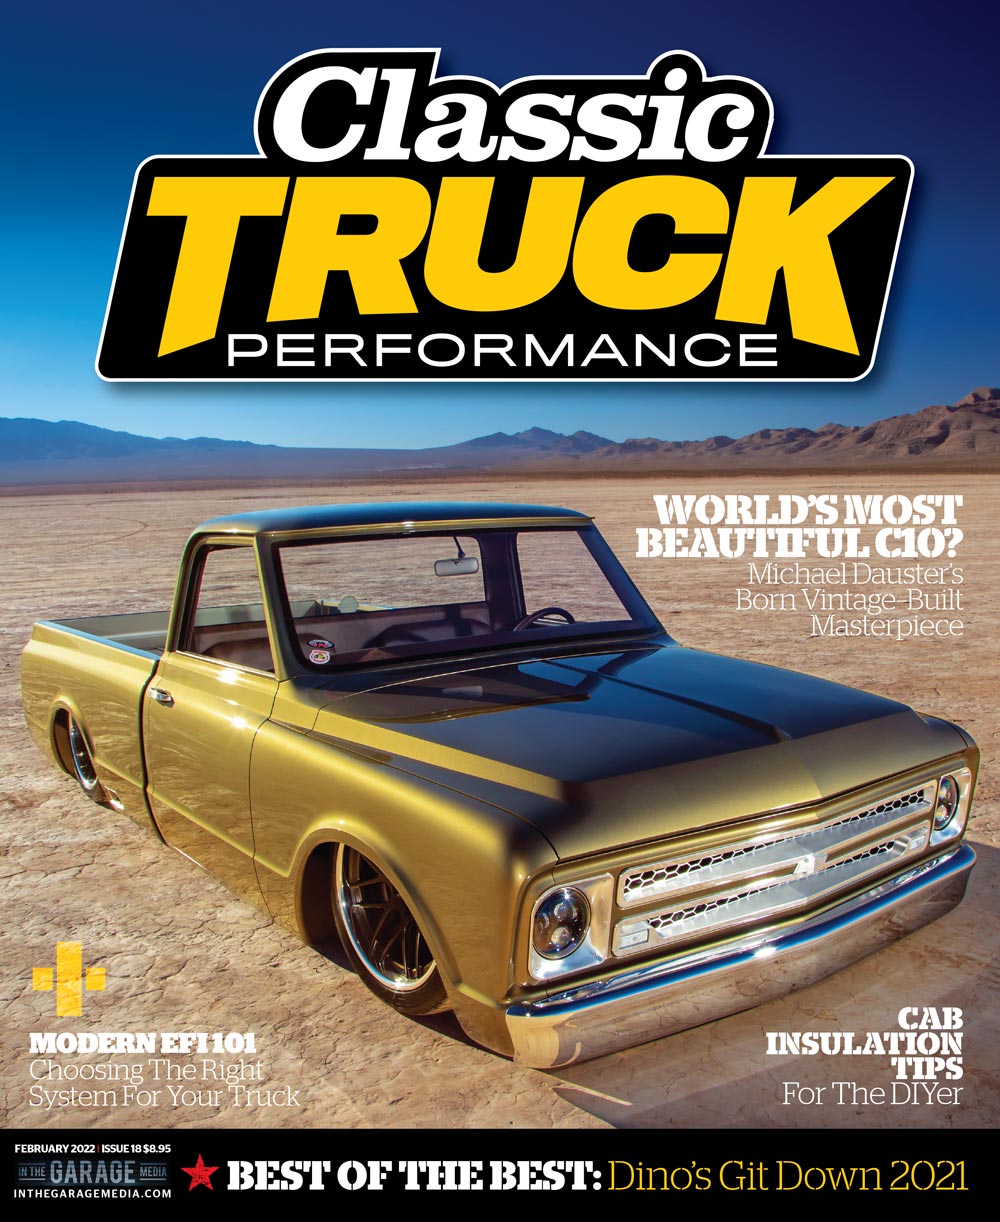 Classic Truck Performance February 2022 cover